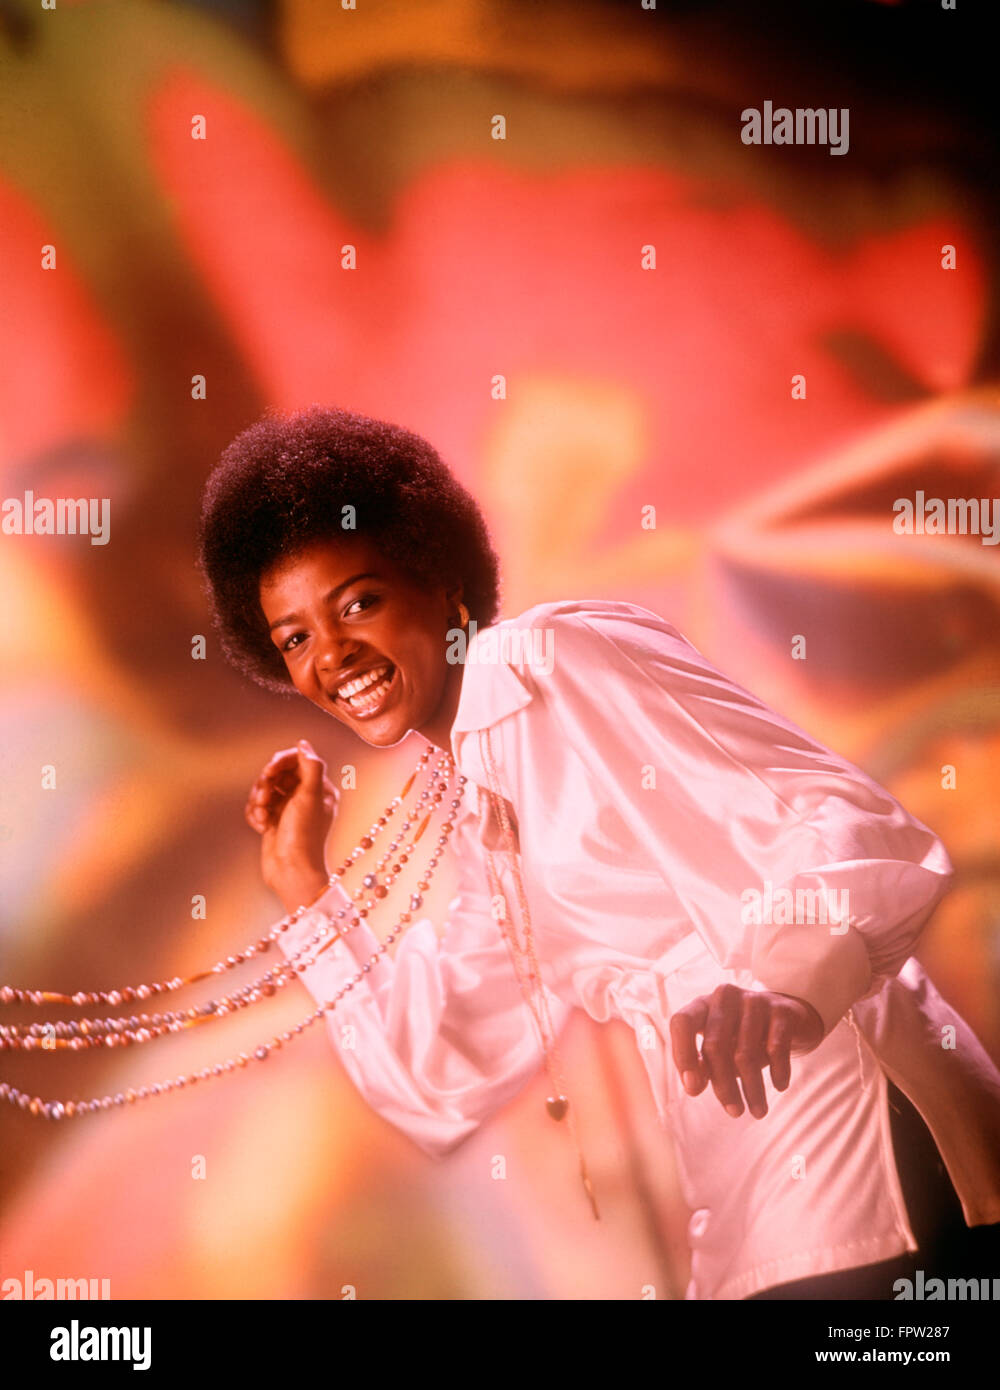 1970s LAUGHING YOUNG AFRICAN AMERICAN WOMAN AFRO HAIR STYLE WHITE SILK SHIRT SINGING DANCING BEADS SWINGING LOOKING AT CAMERA Stock Photo